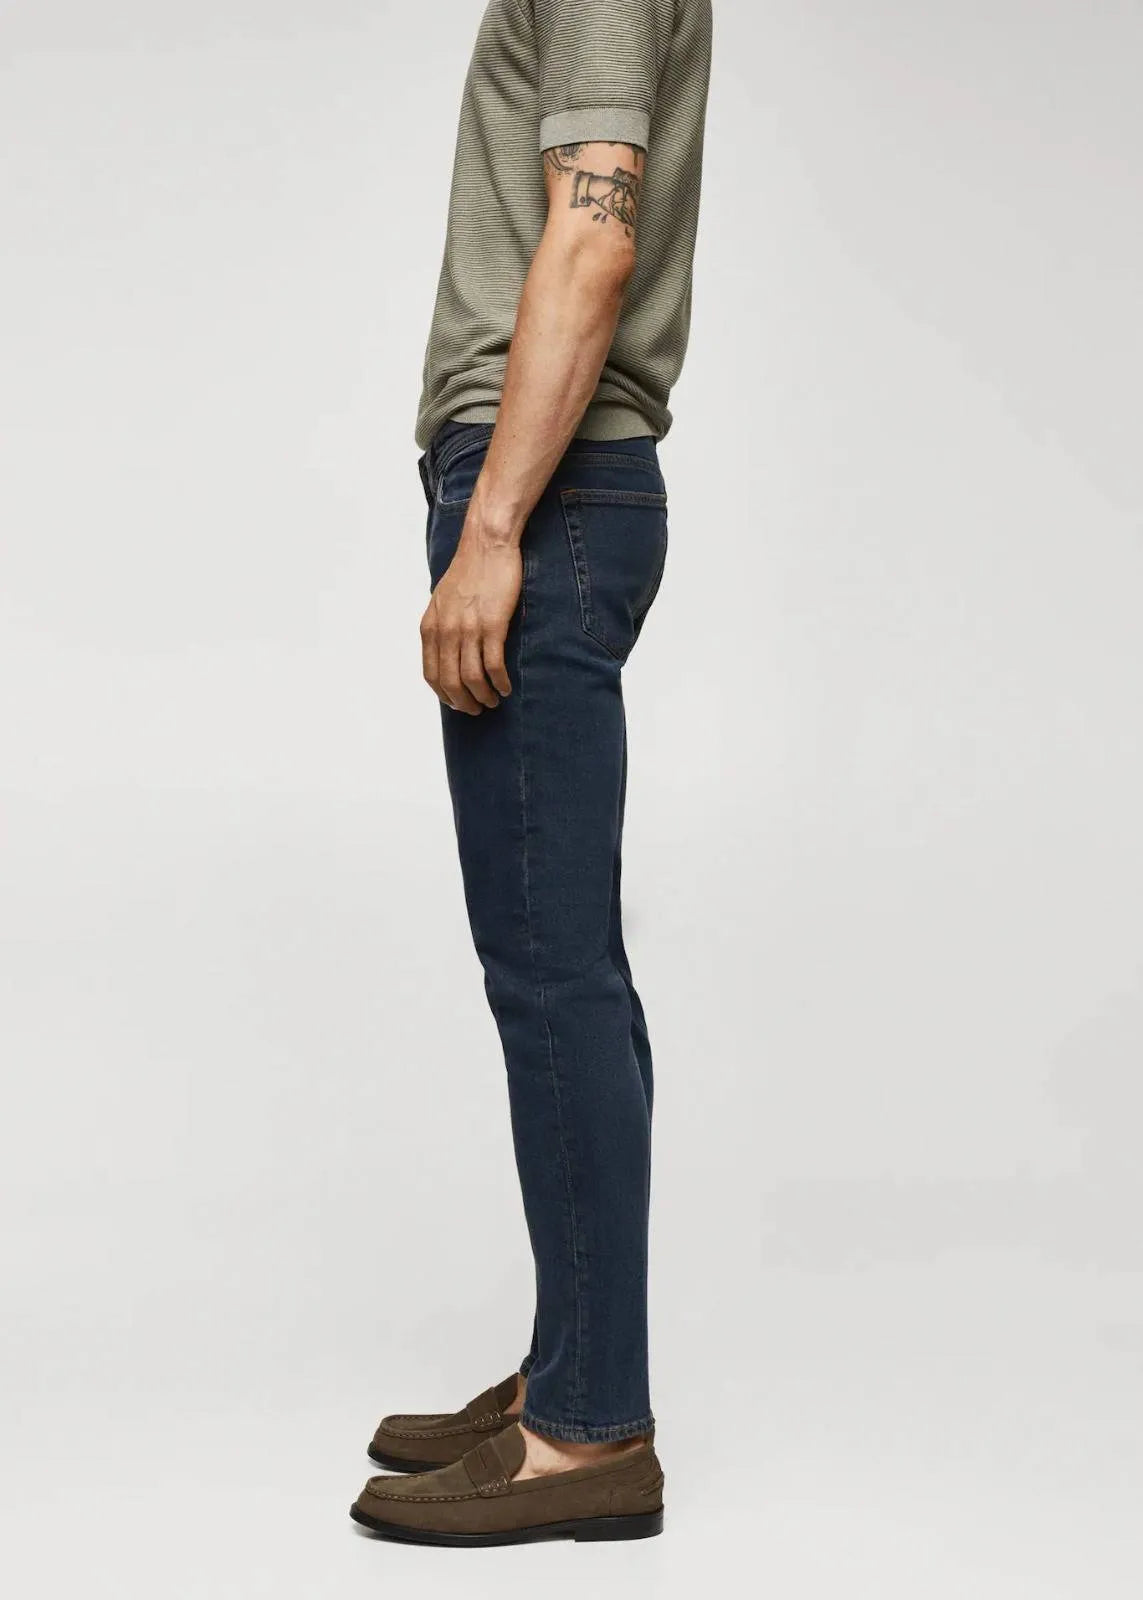 Mango Jan Jeans: Slim-fit comfort meets stylish denim (mention size if relevant). Designed to hug your legs comfortably for a sharp silhouette.slim-fit, comfortable, stylish, versatile, denim essentials.